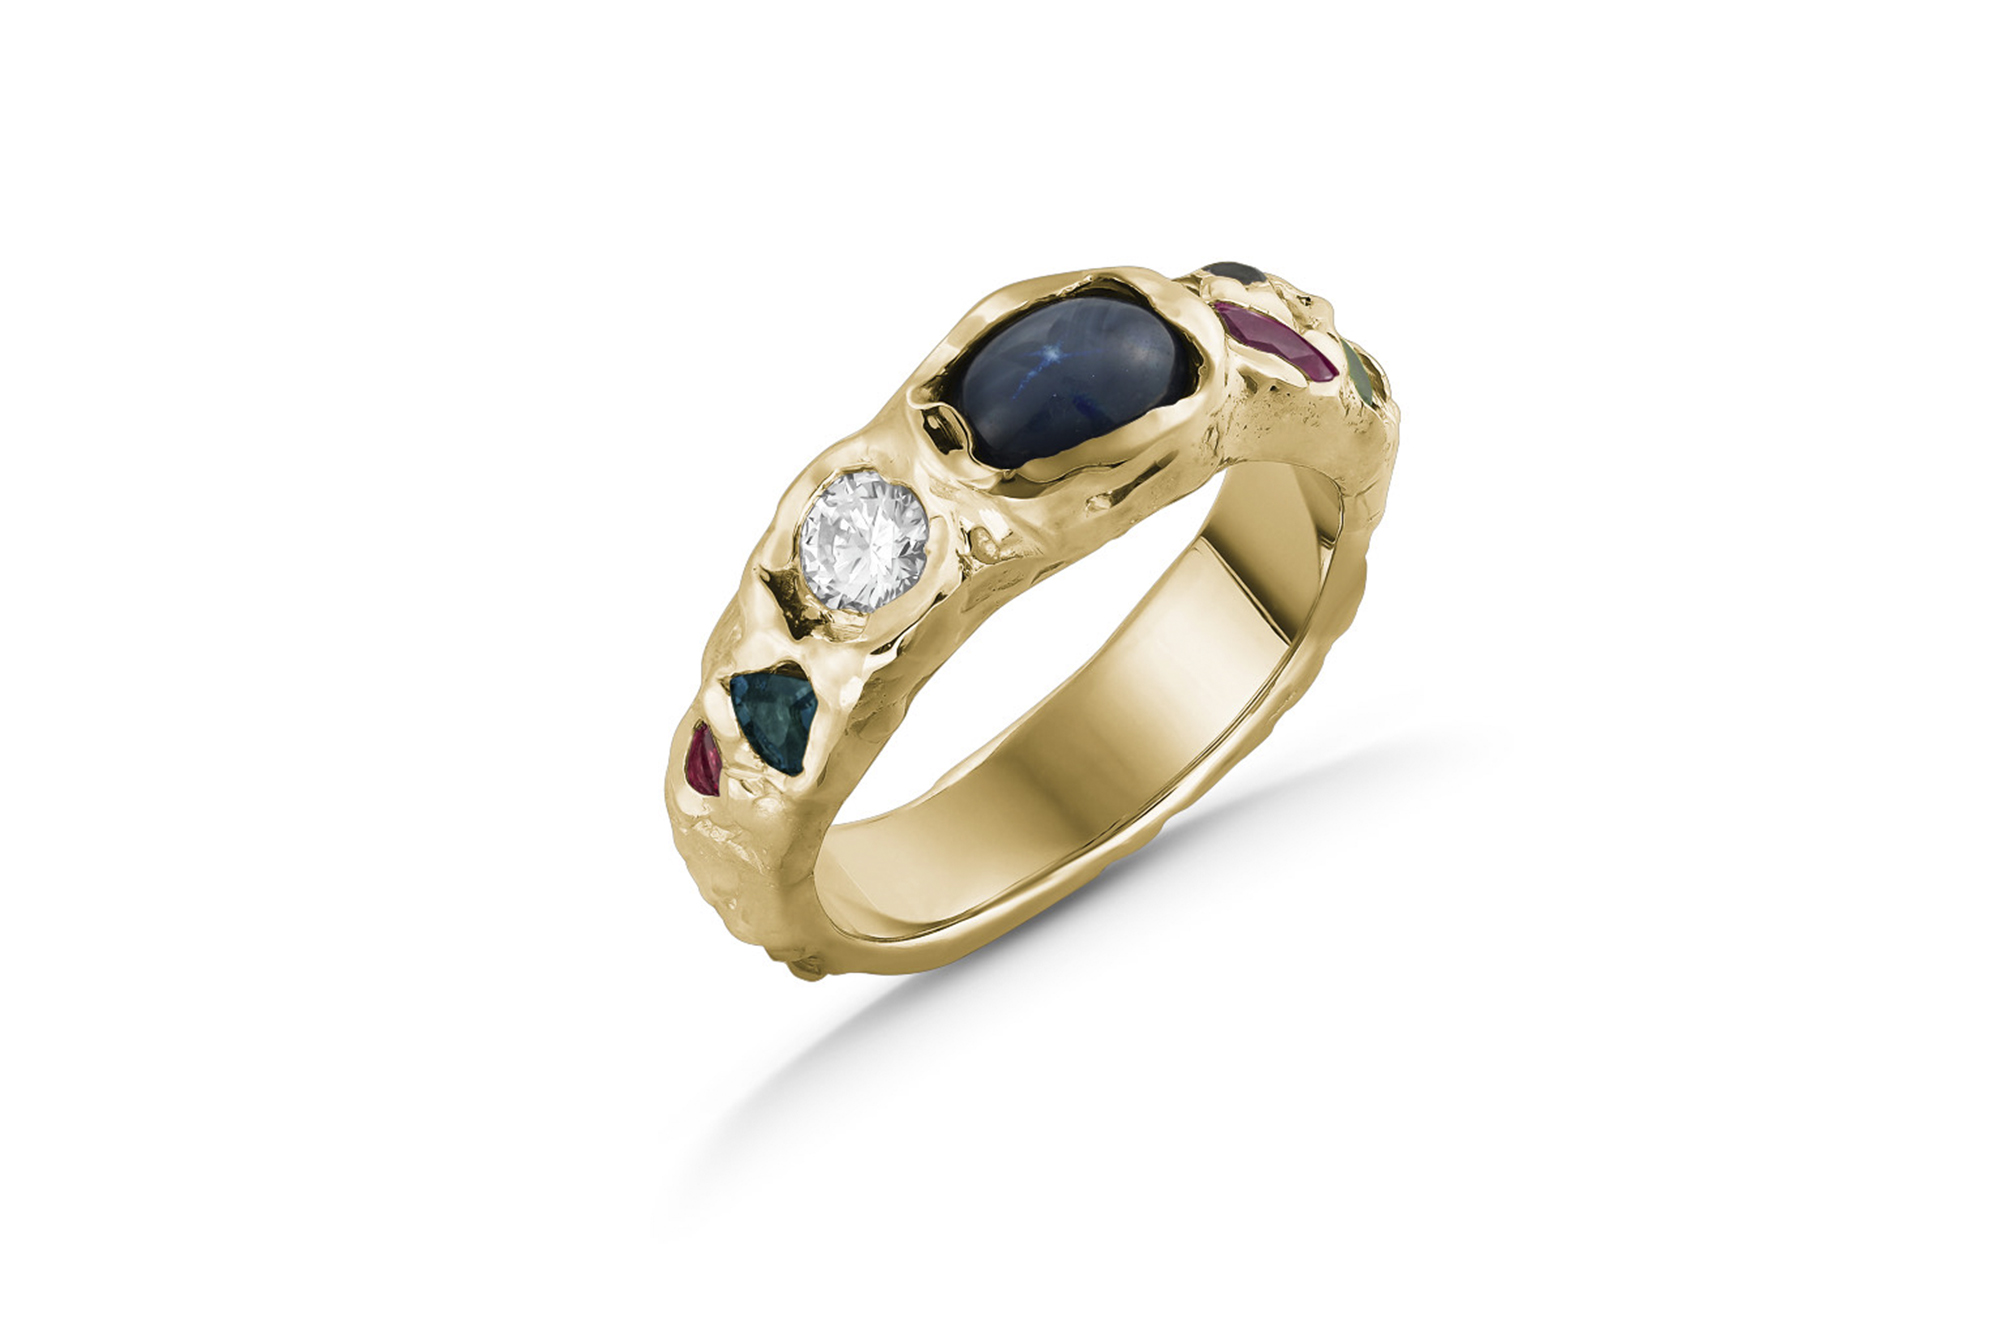 Joel Muller gold ring with stones